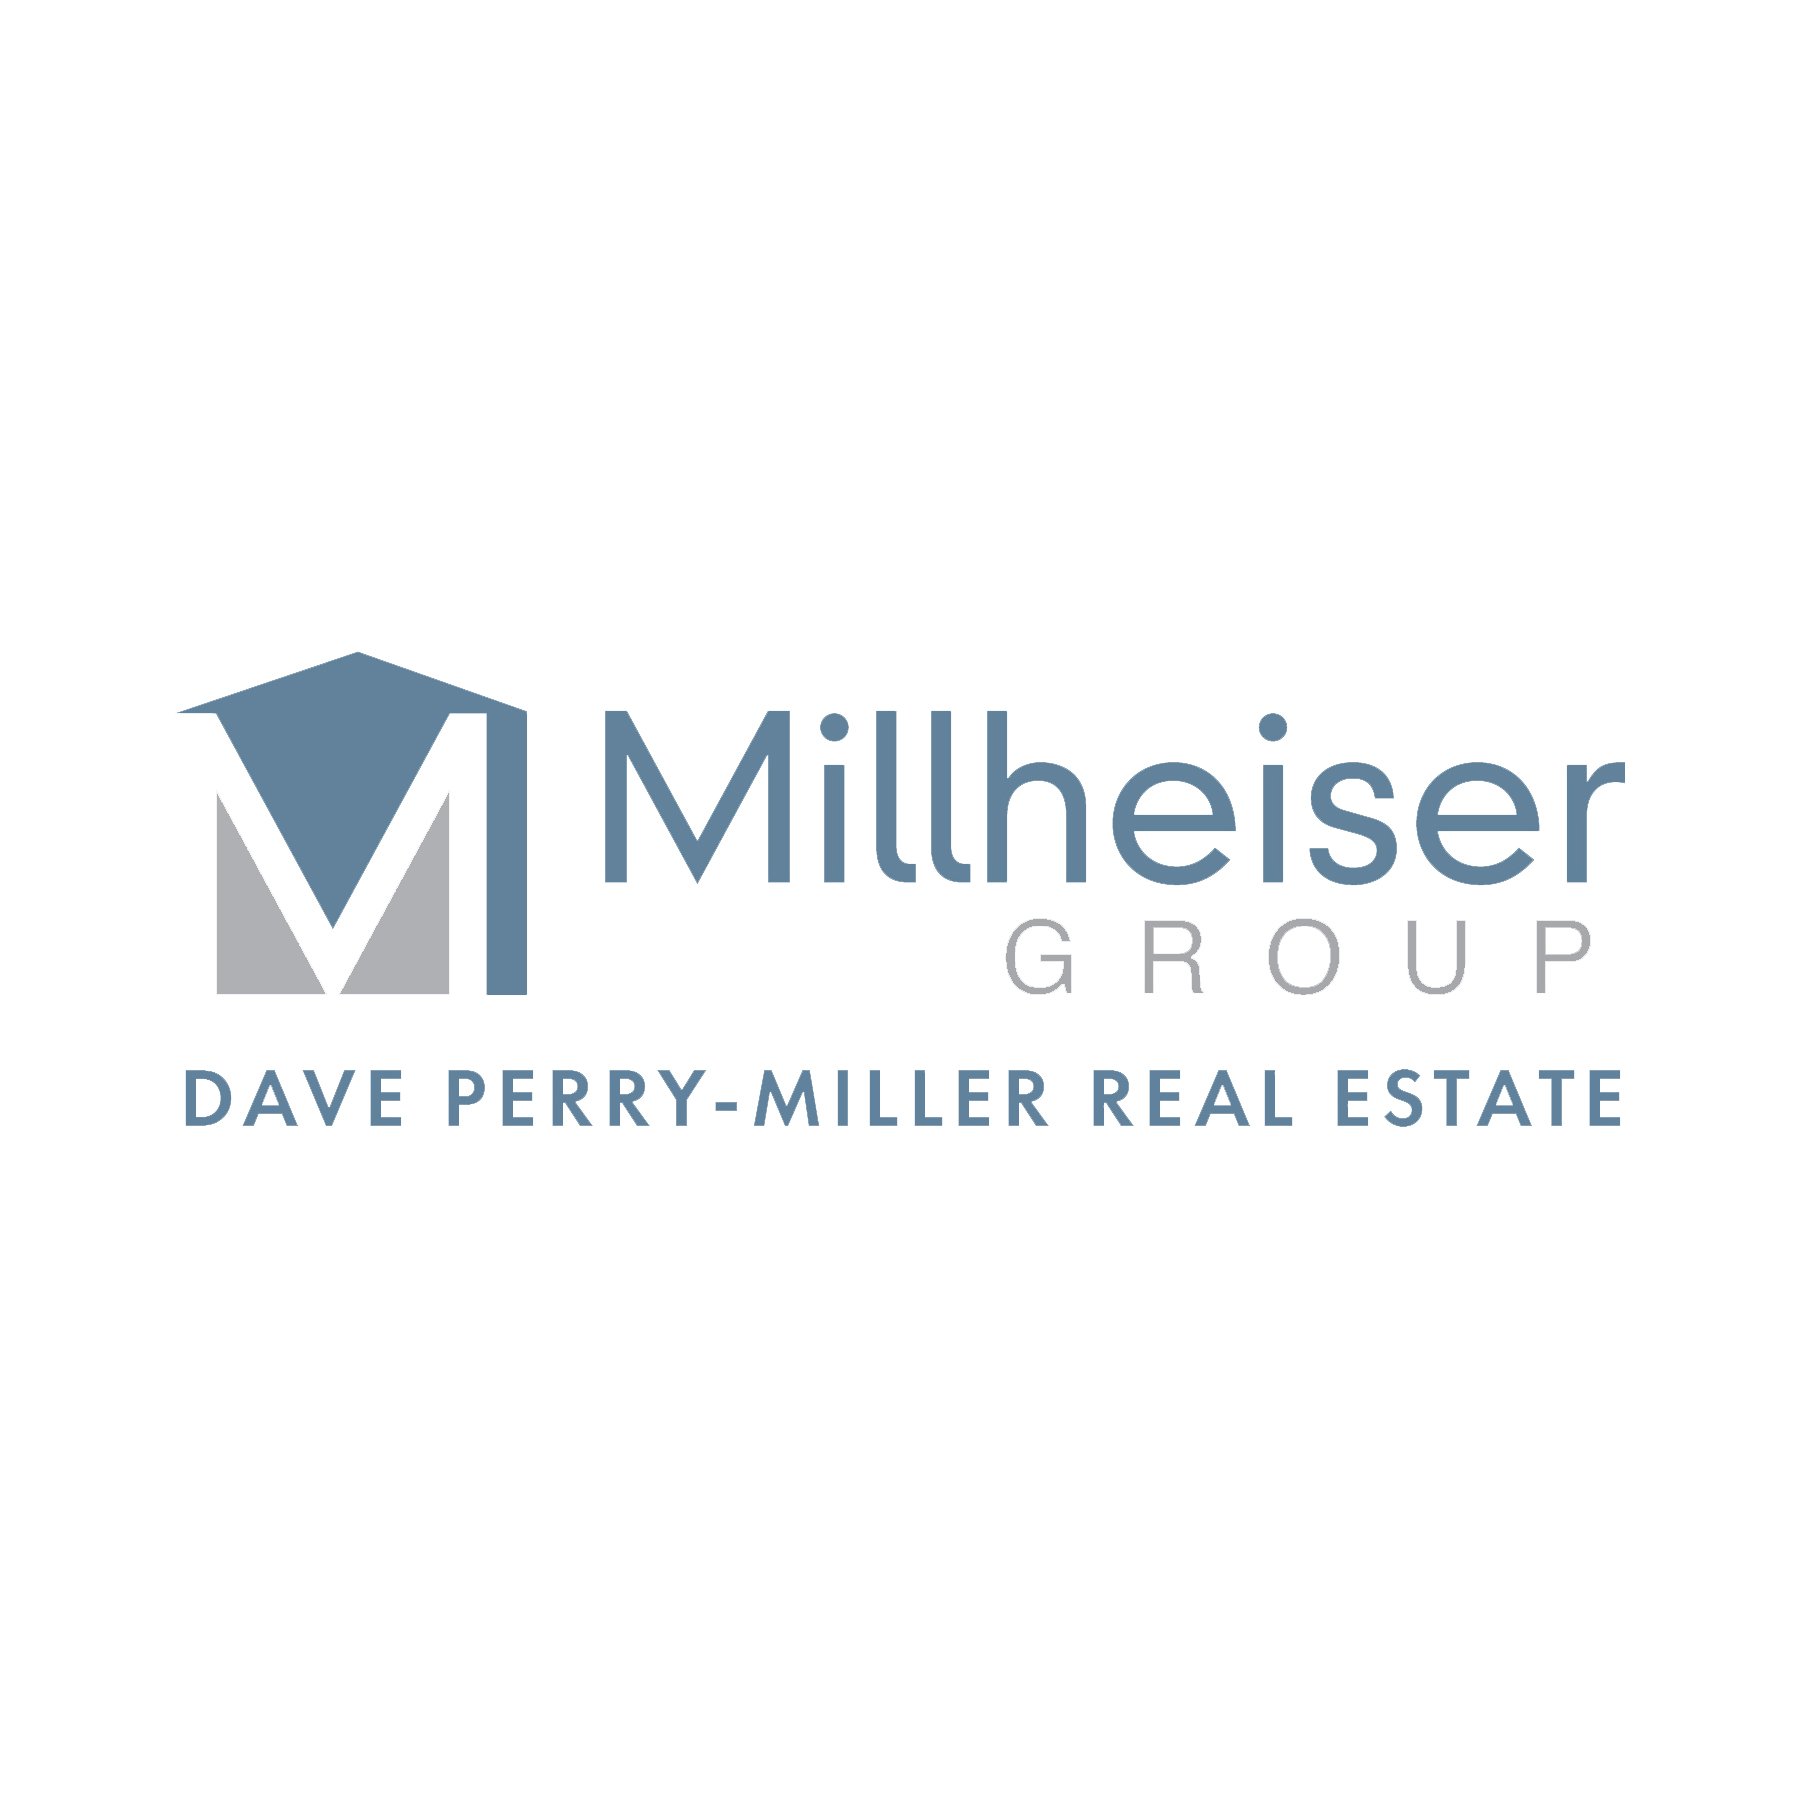 Millheiser Group of Dave Perry-Miller Real Estate